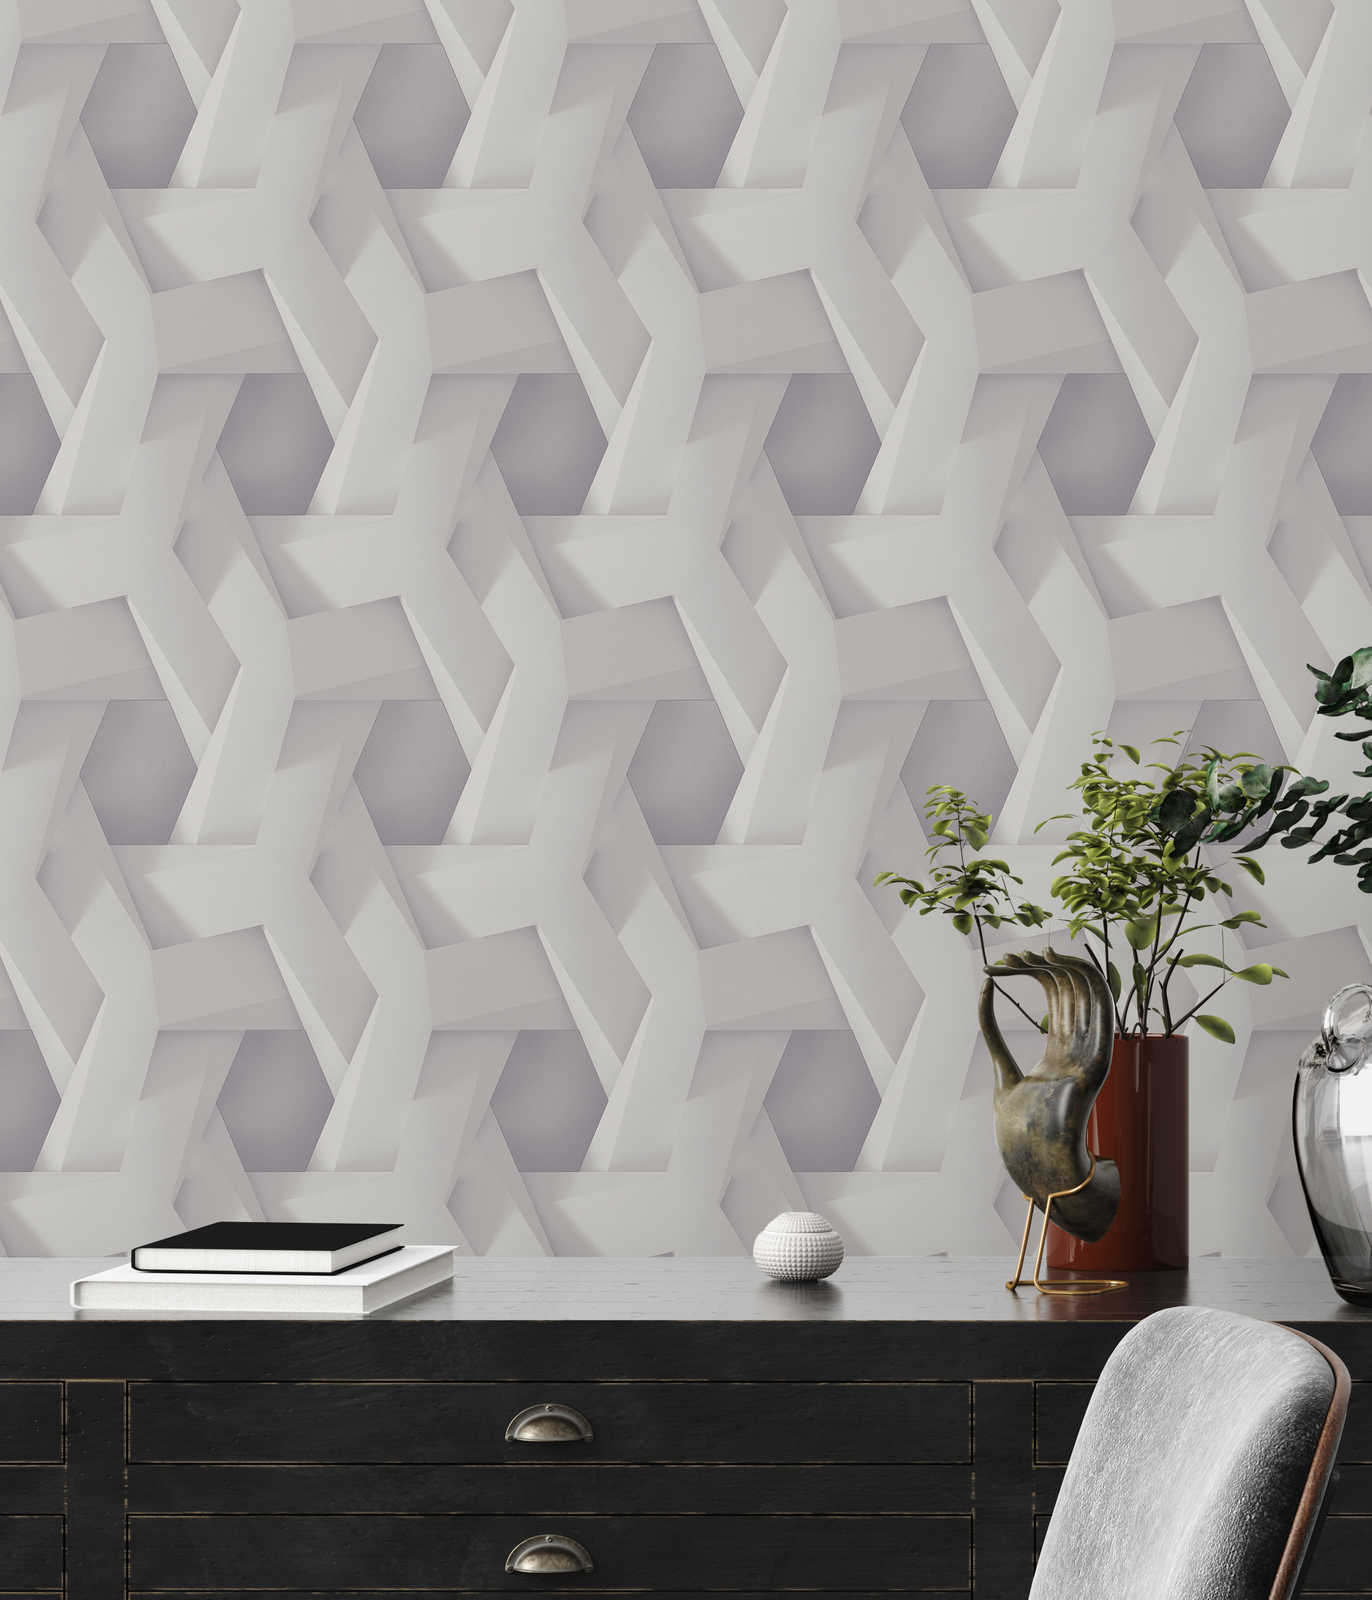             3D wallpaper light grey graphic pattern with concrete look
        